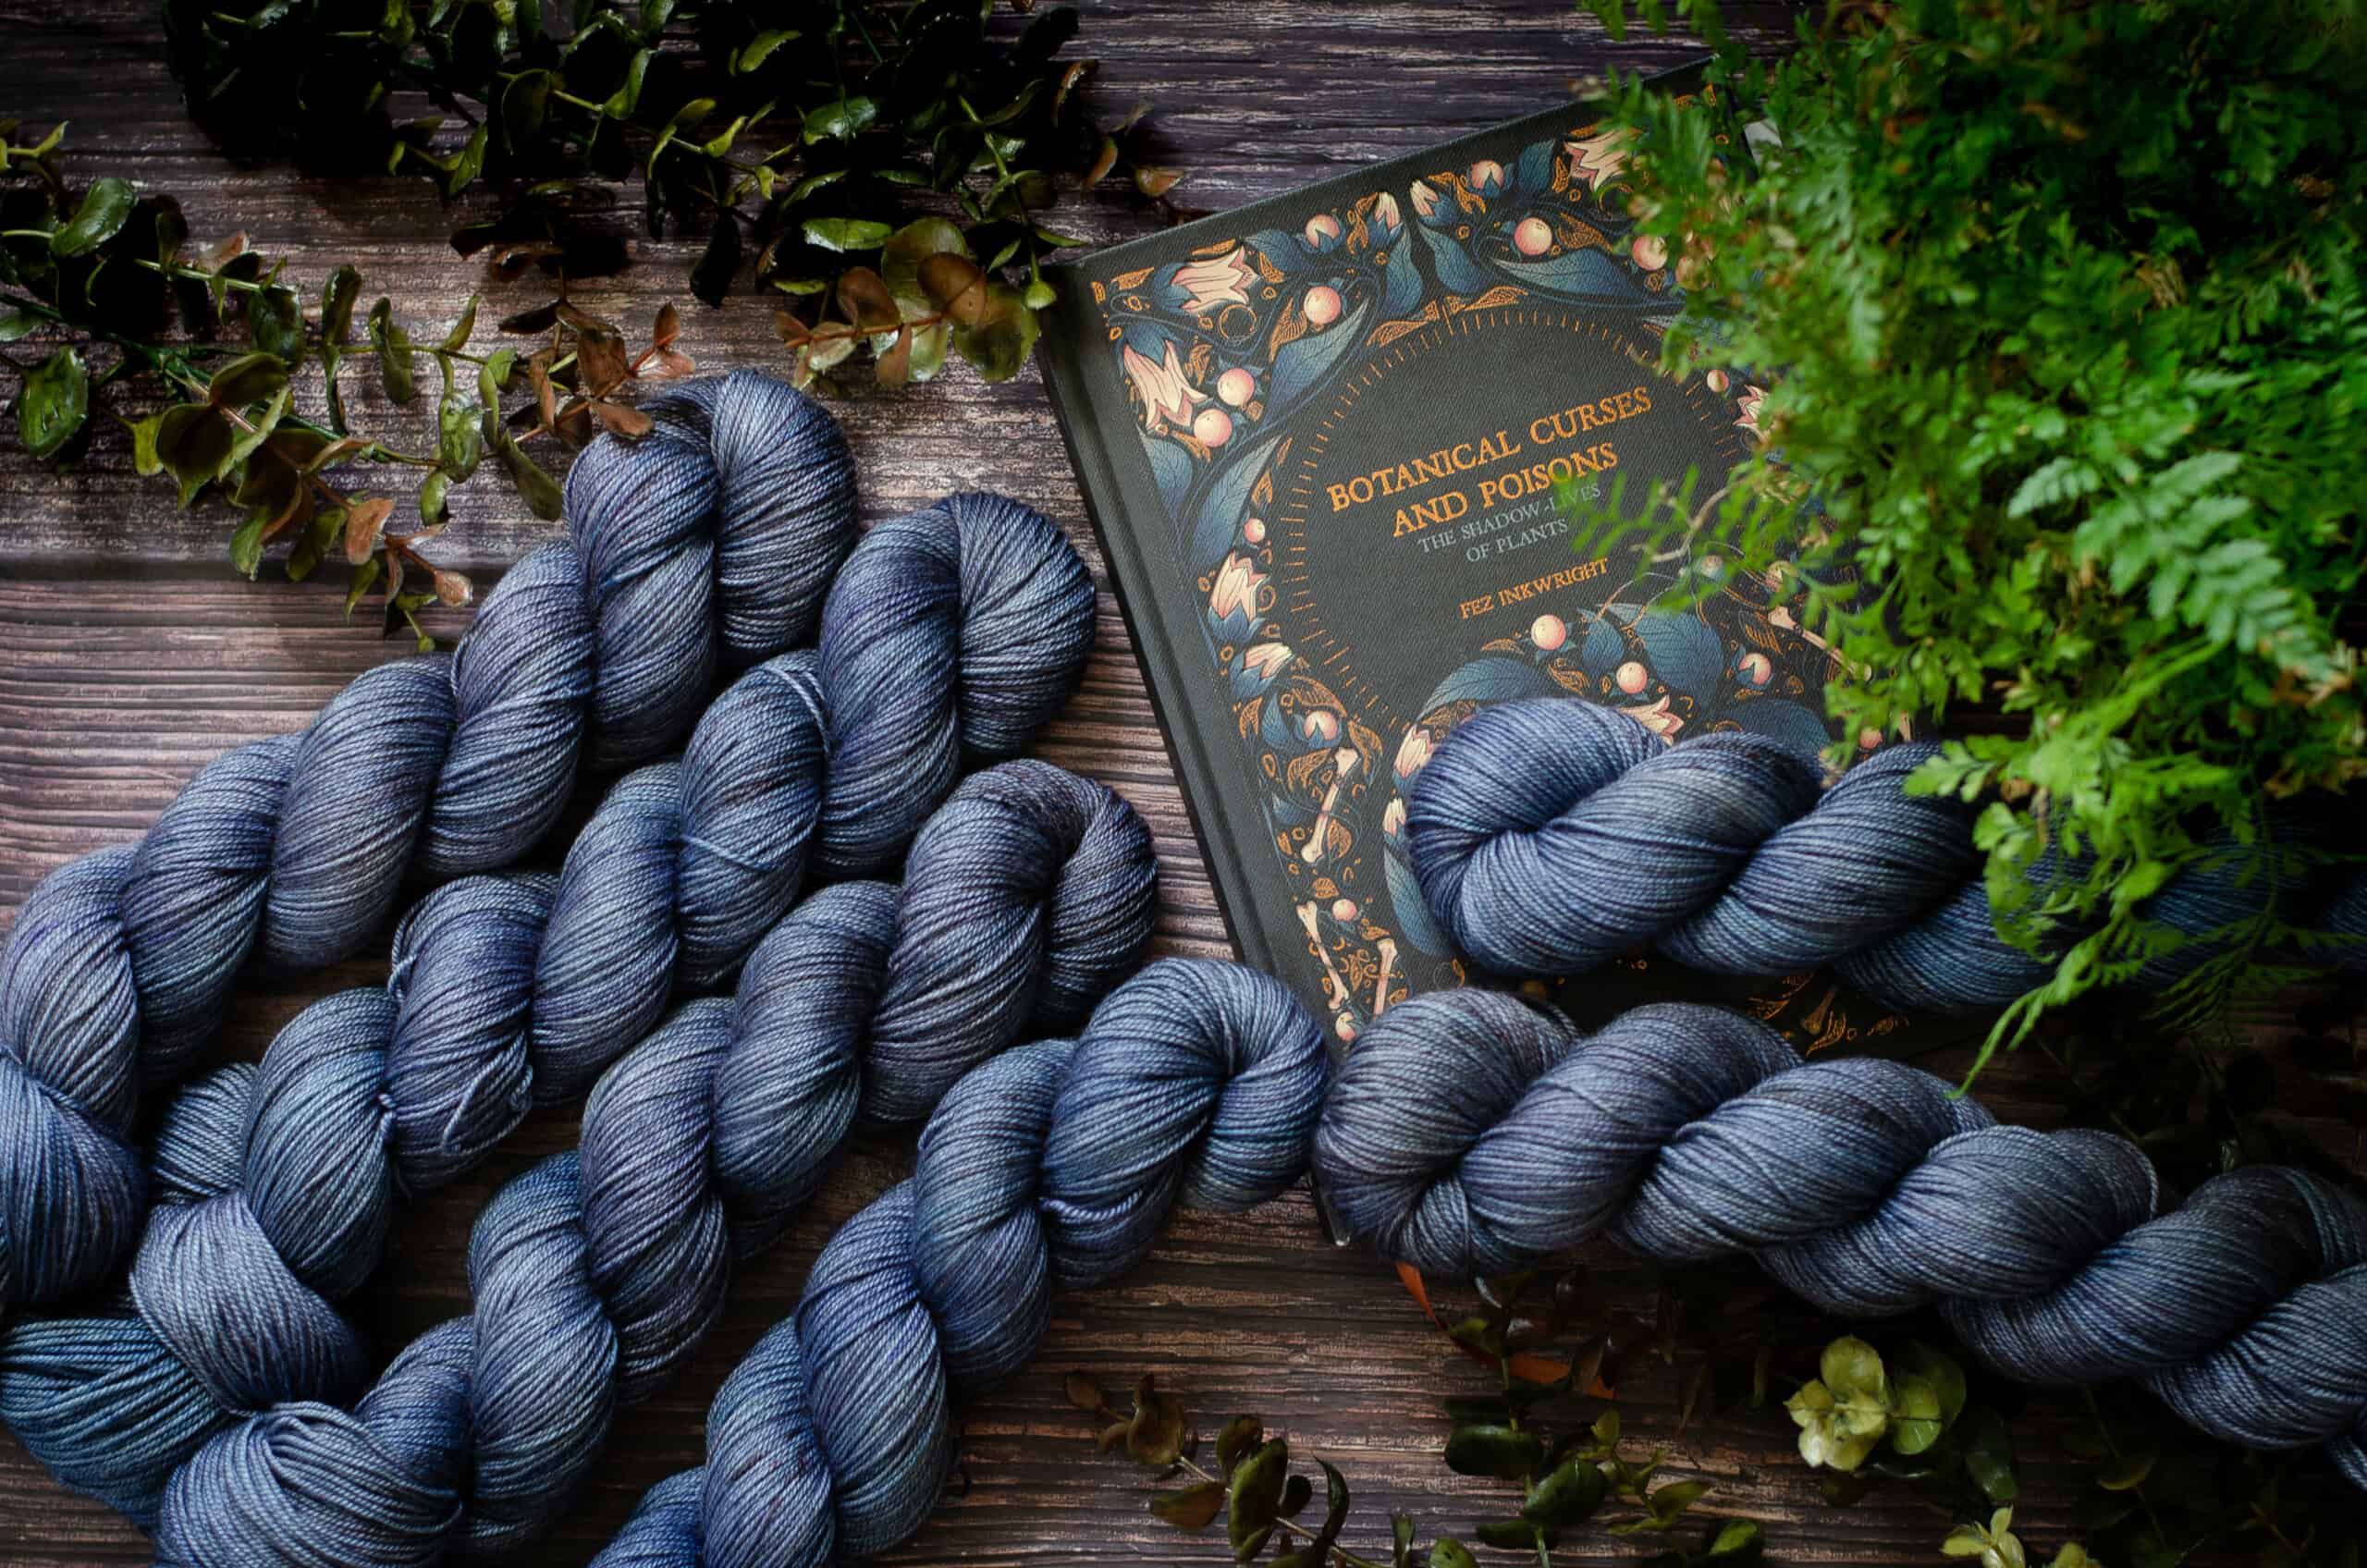 Six skeins of blue-purple yarn surrounded by ferns and a book with the title Botanical curses and poisons.